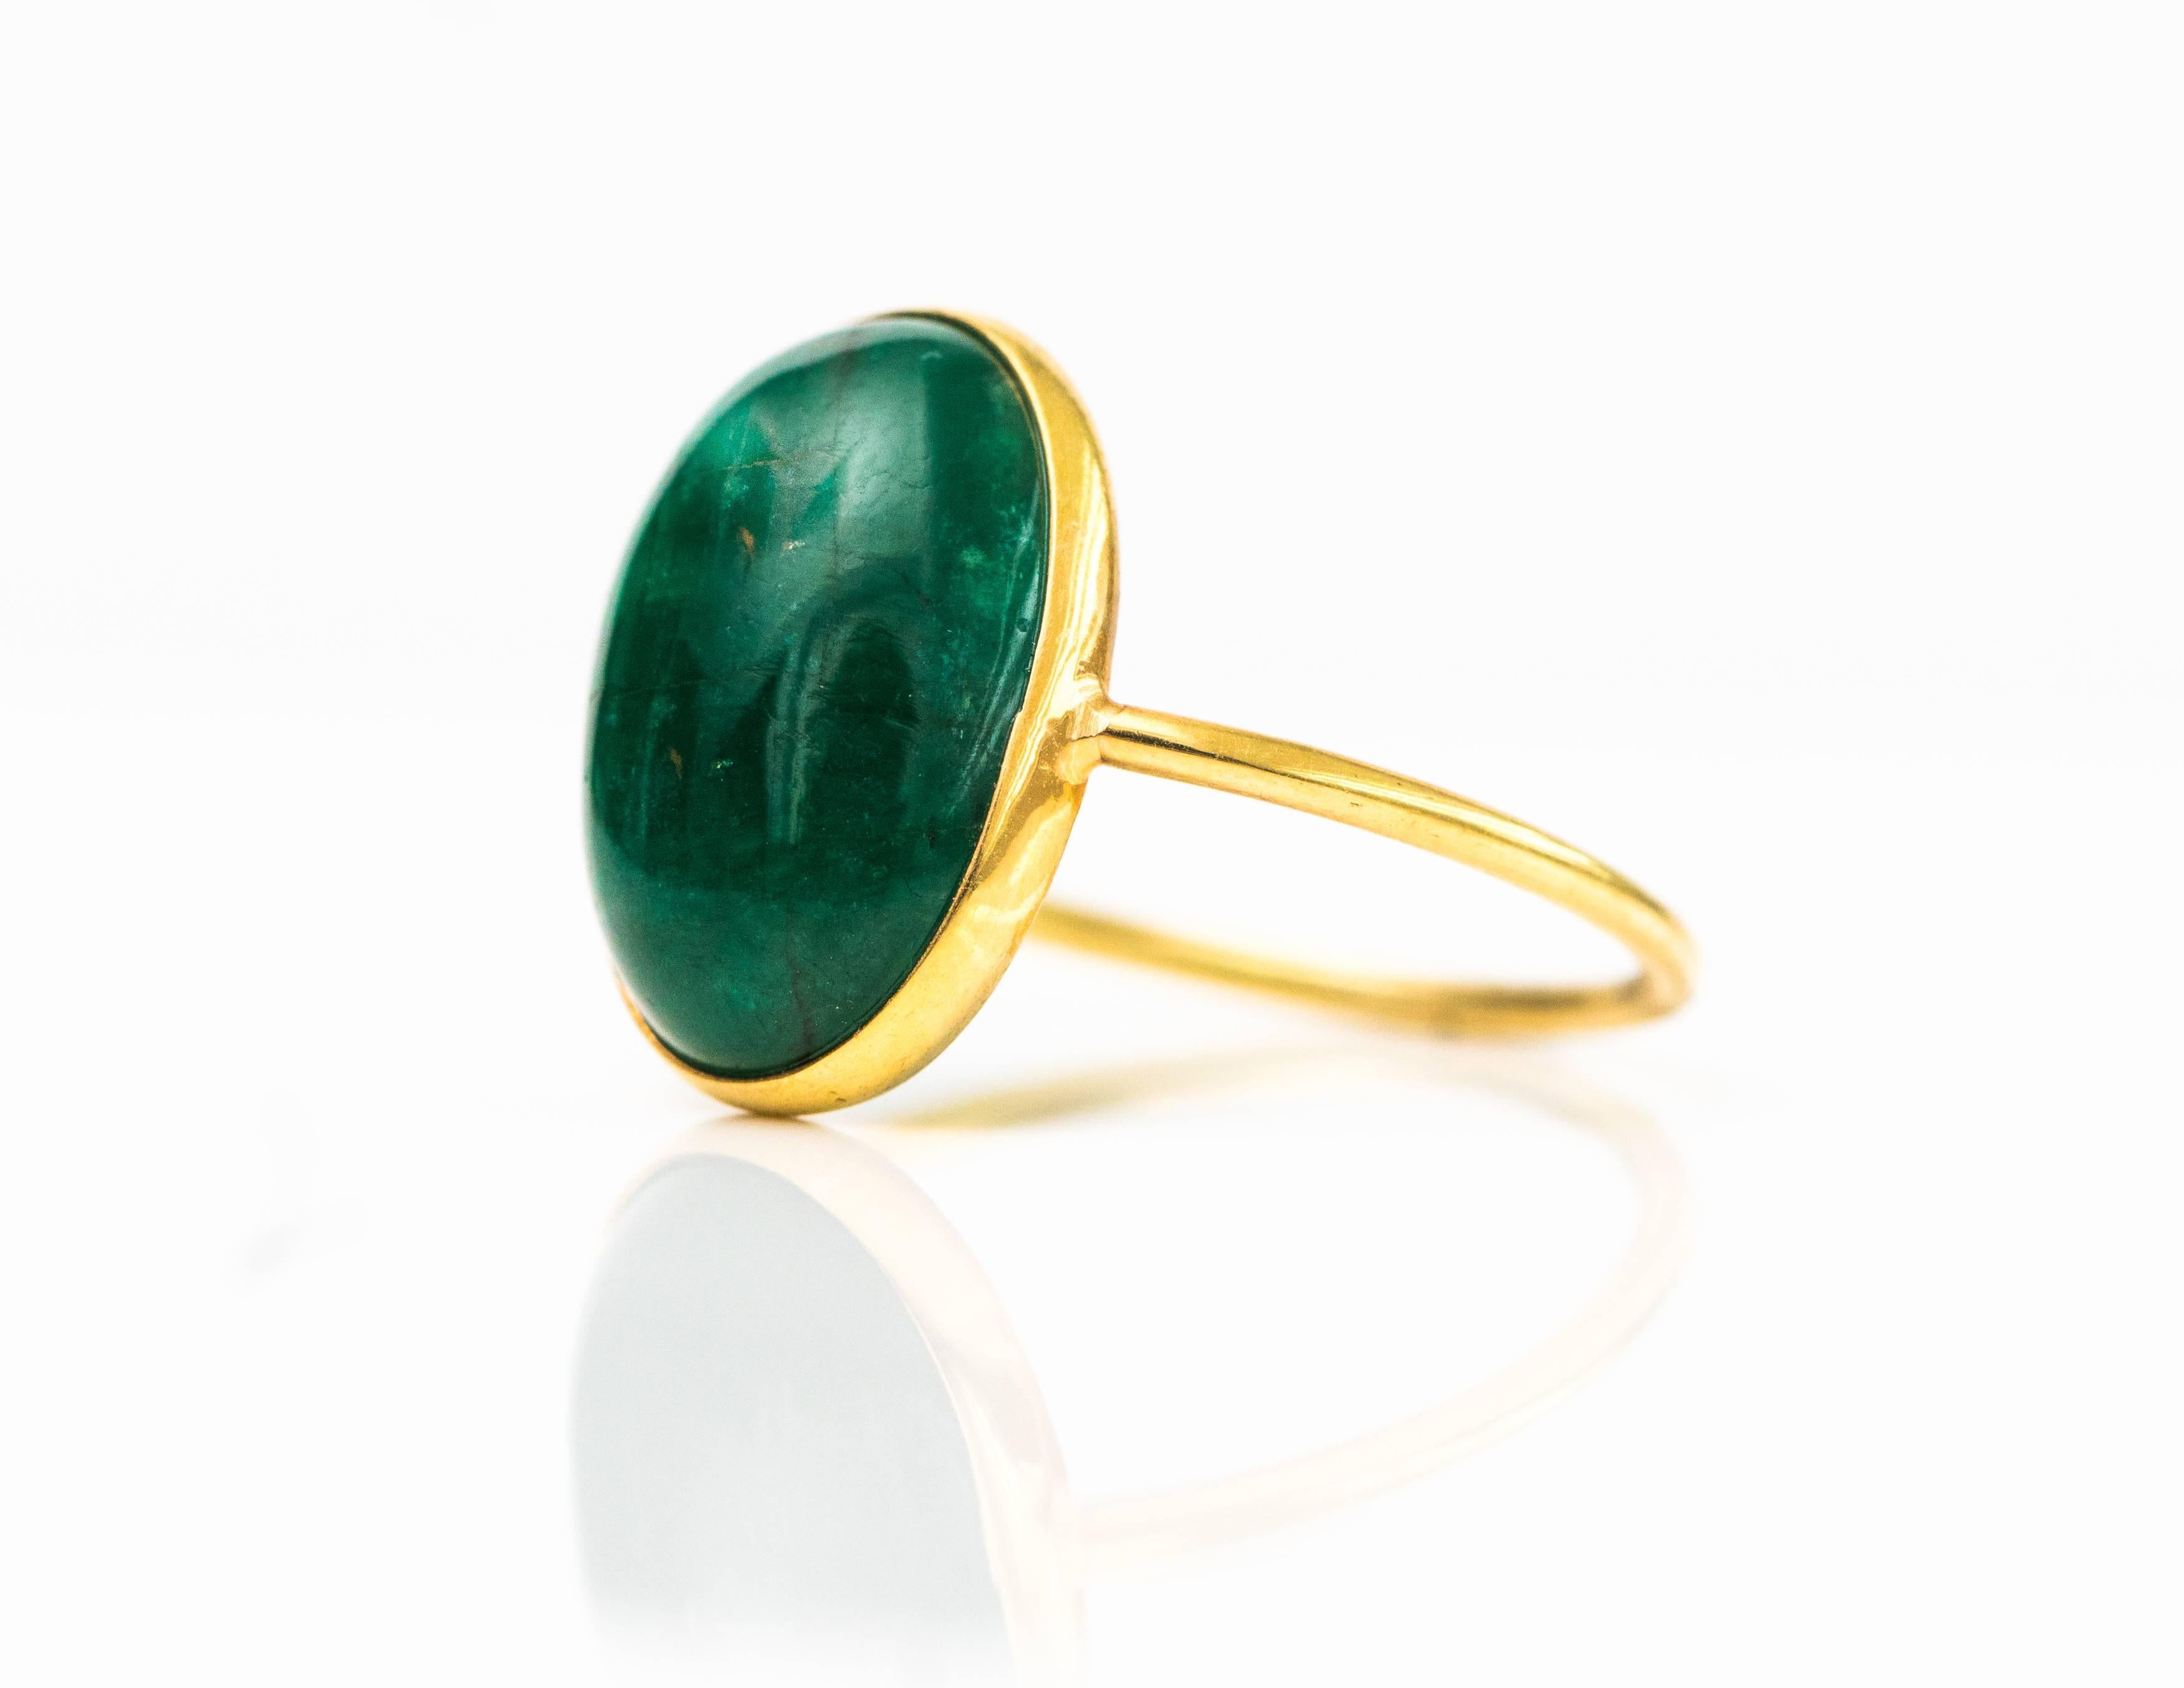 4.5 Carat Oval South American Emerald Ring - 18 Karat Yellow Gold, Emerald

Features an oval Emerald cabochon bezel set in 18 Karat Yellow Gold. This South American Emerald has a luxurious, dark forest green color. This gorgeous deep green Emerald